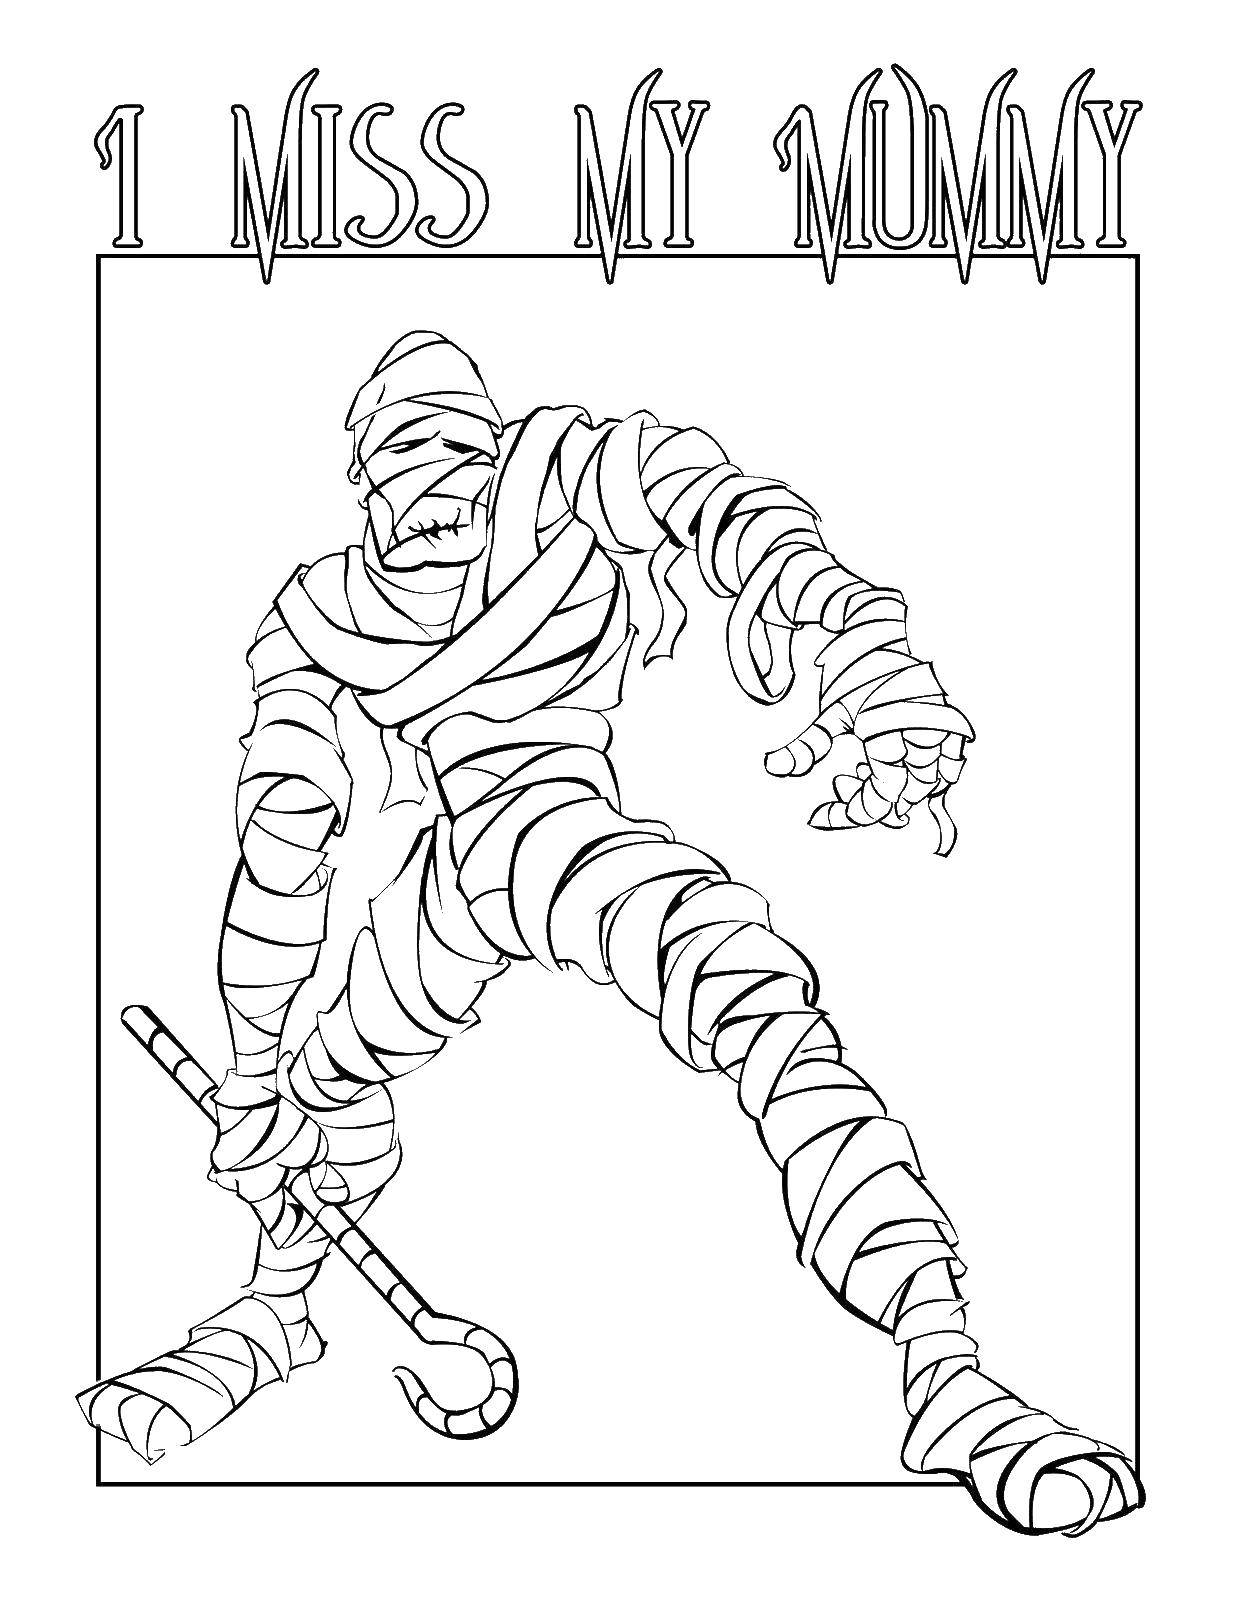 Coloring Mummy. Category The mummy. Tags:  the mummy.